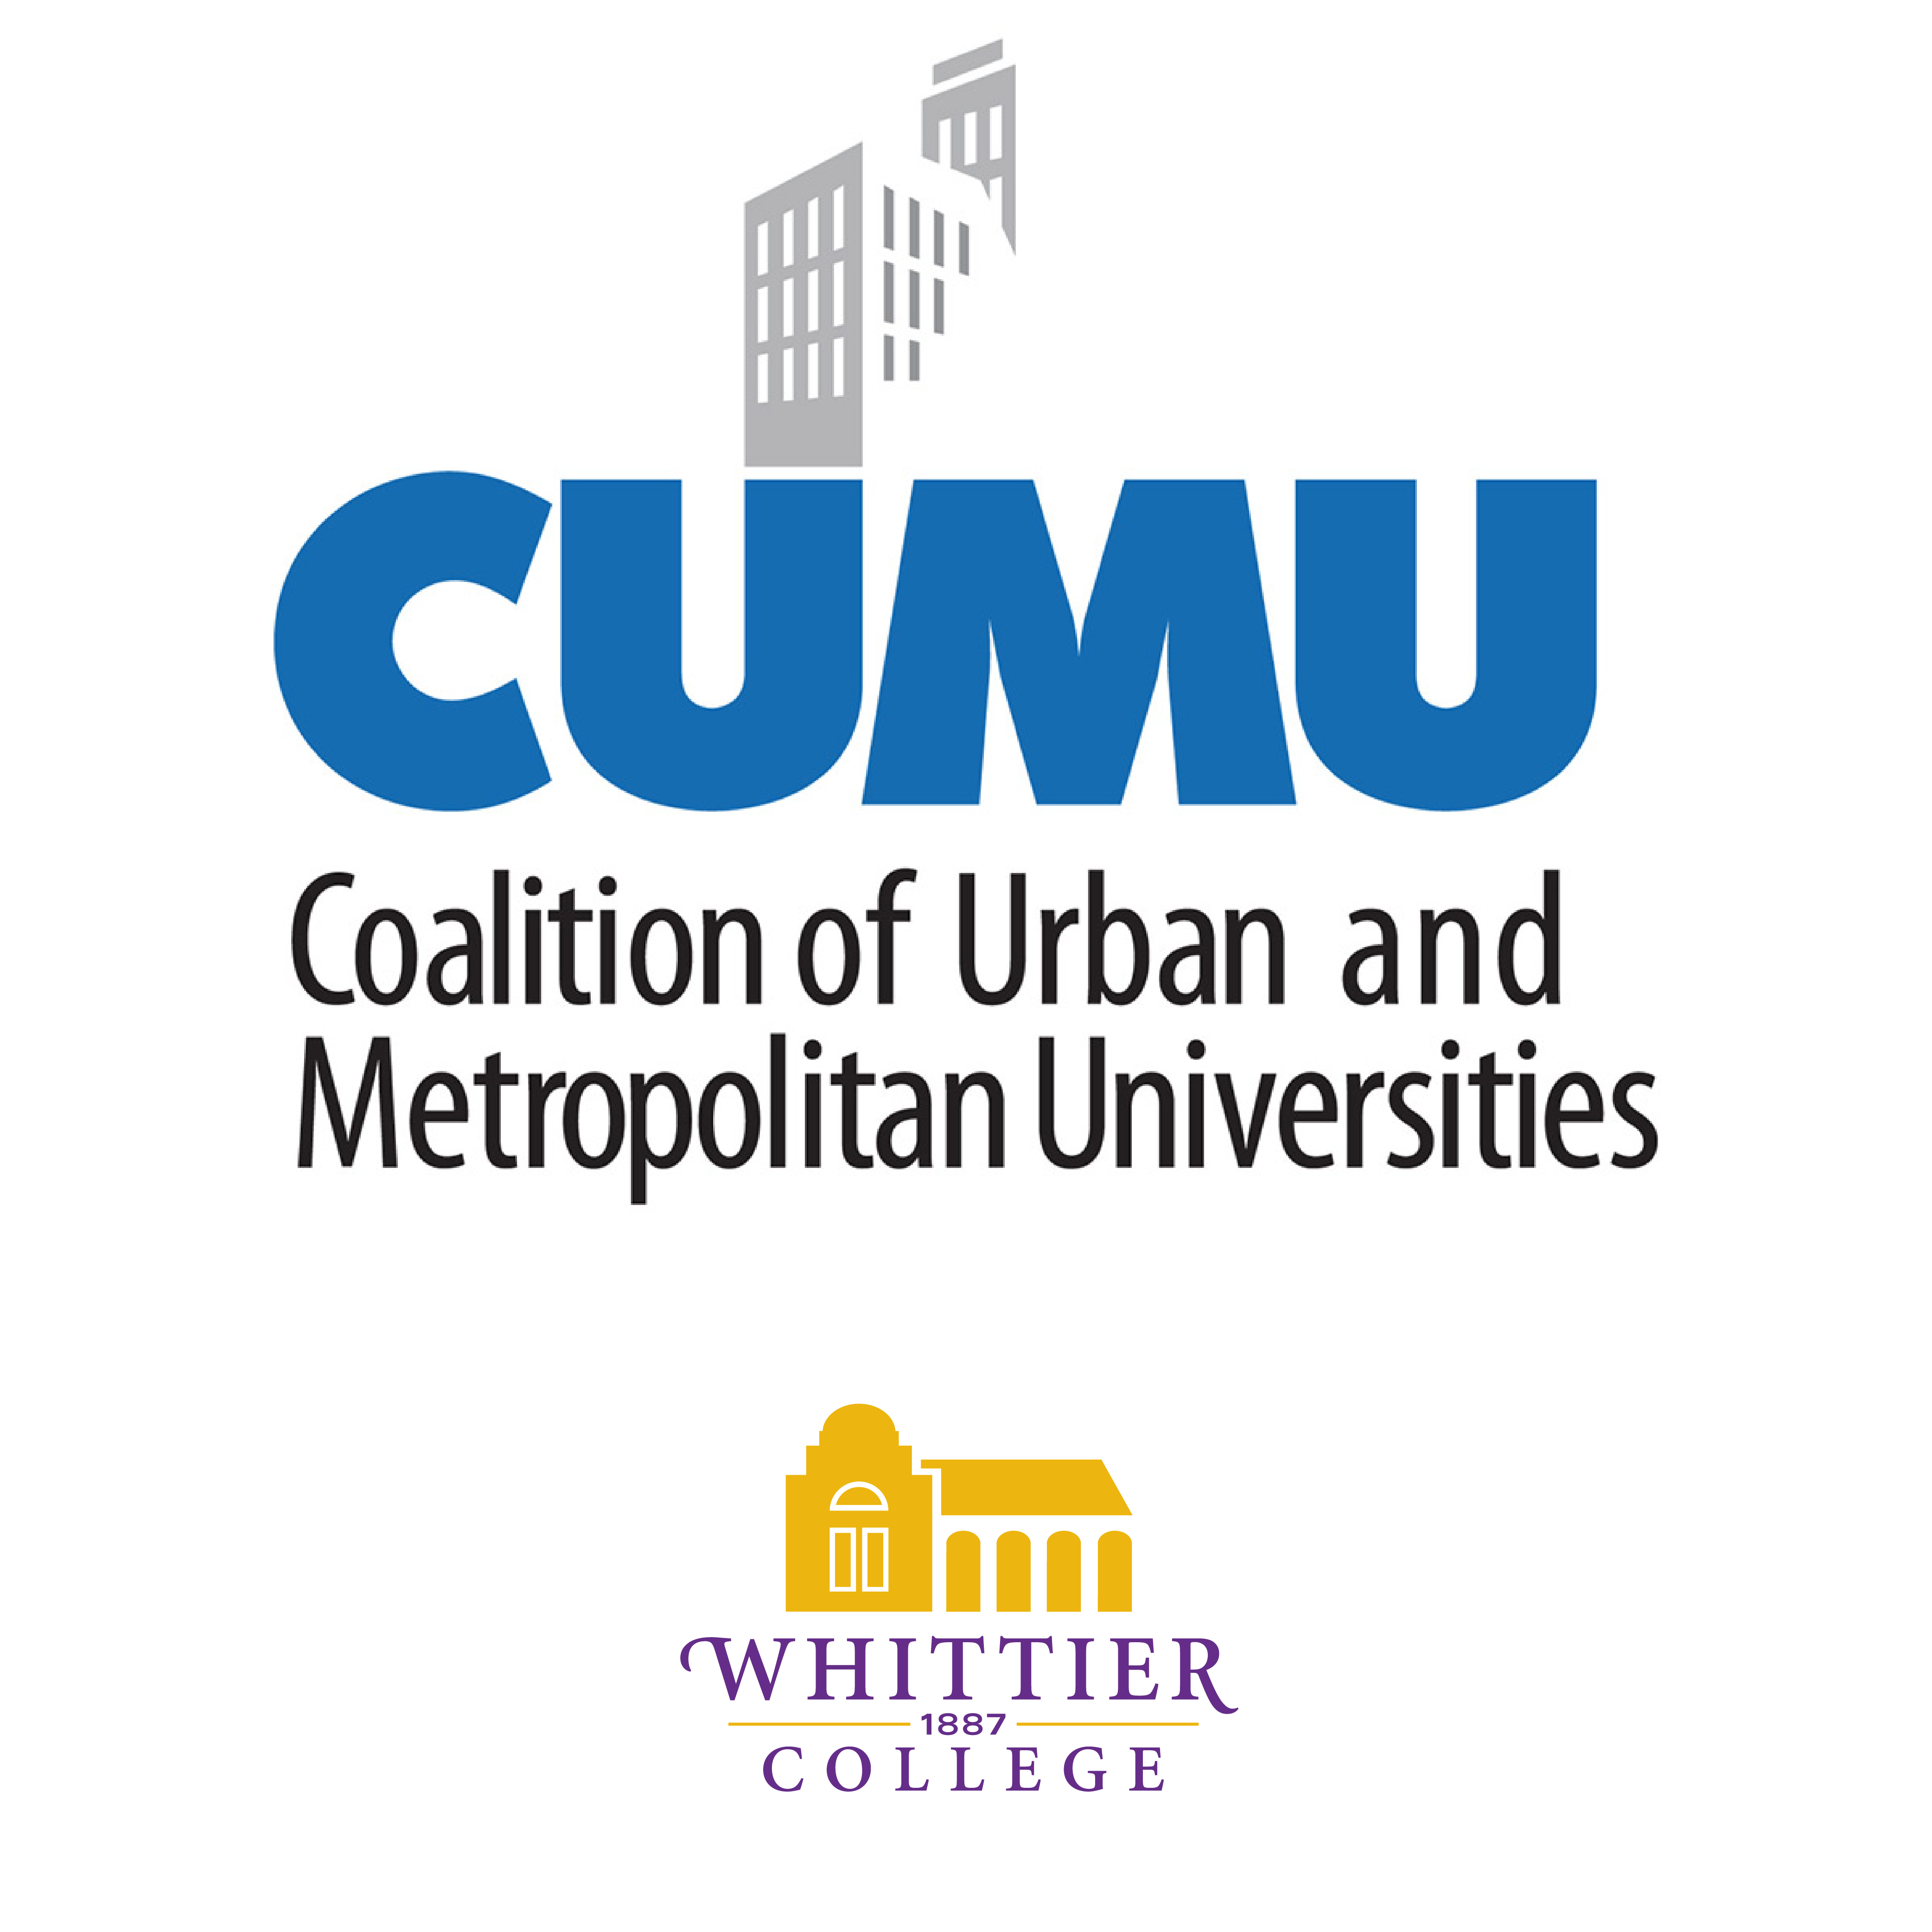 Coalition of Urban and Metropolitan Universities and Whittier College logo